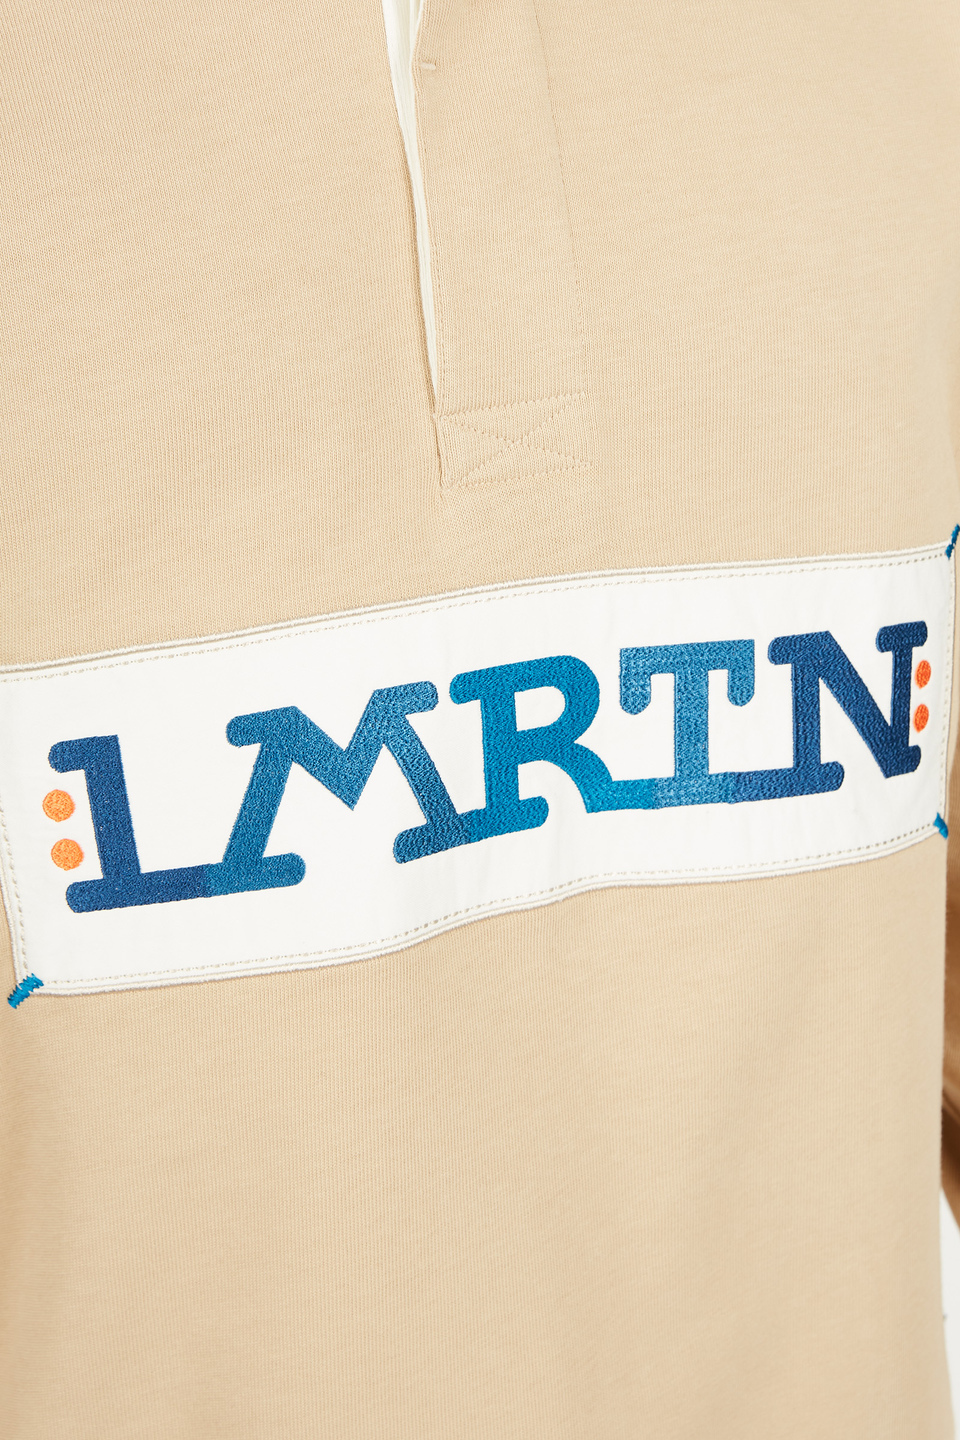 Short-sleeved polo shirt in 100% cotton, oversized fit | La Martina - Official Online Shop